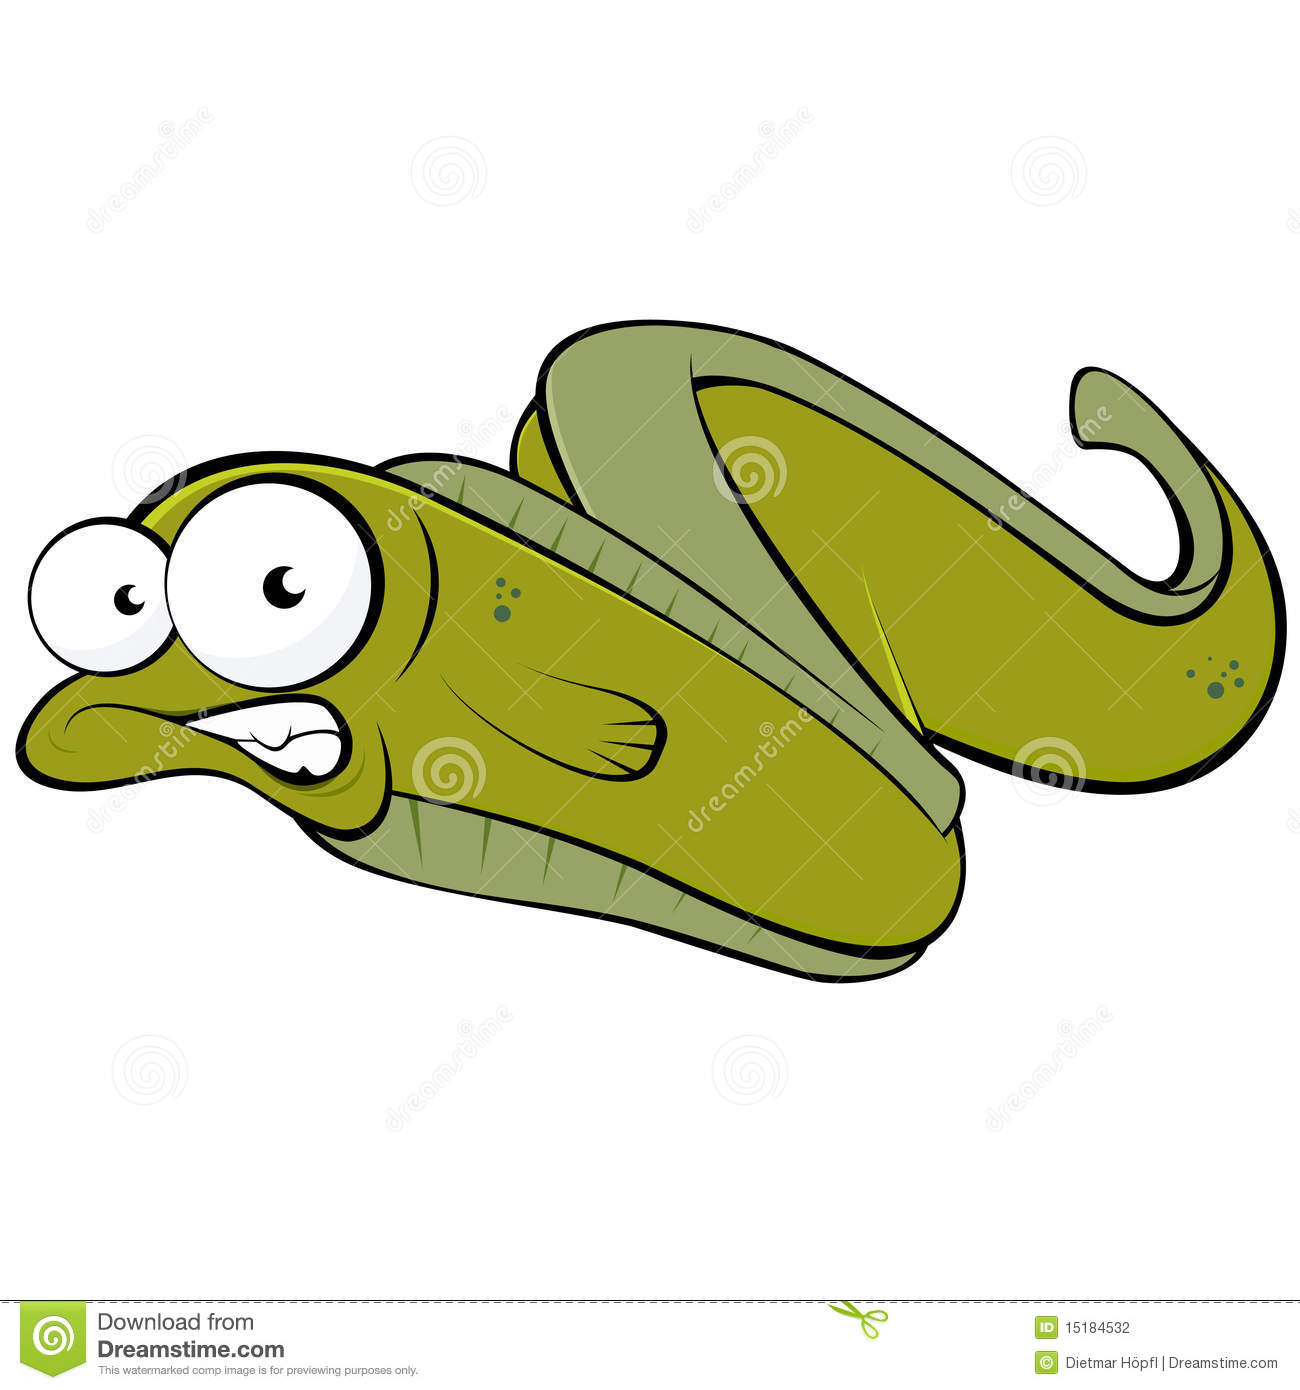 Illustration Of Funny Green Cartoon Eel With Goggle Eyes Isolated On